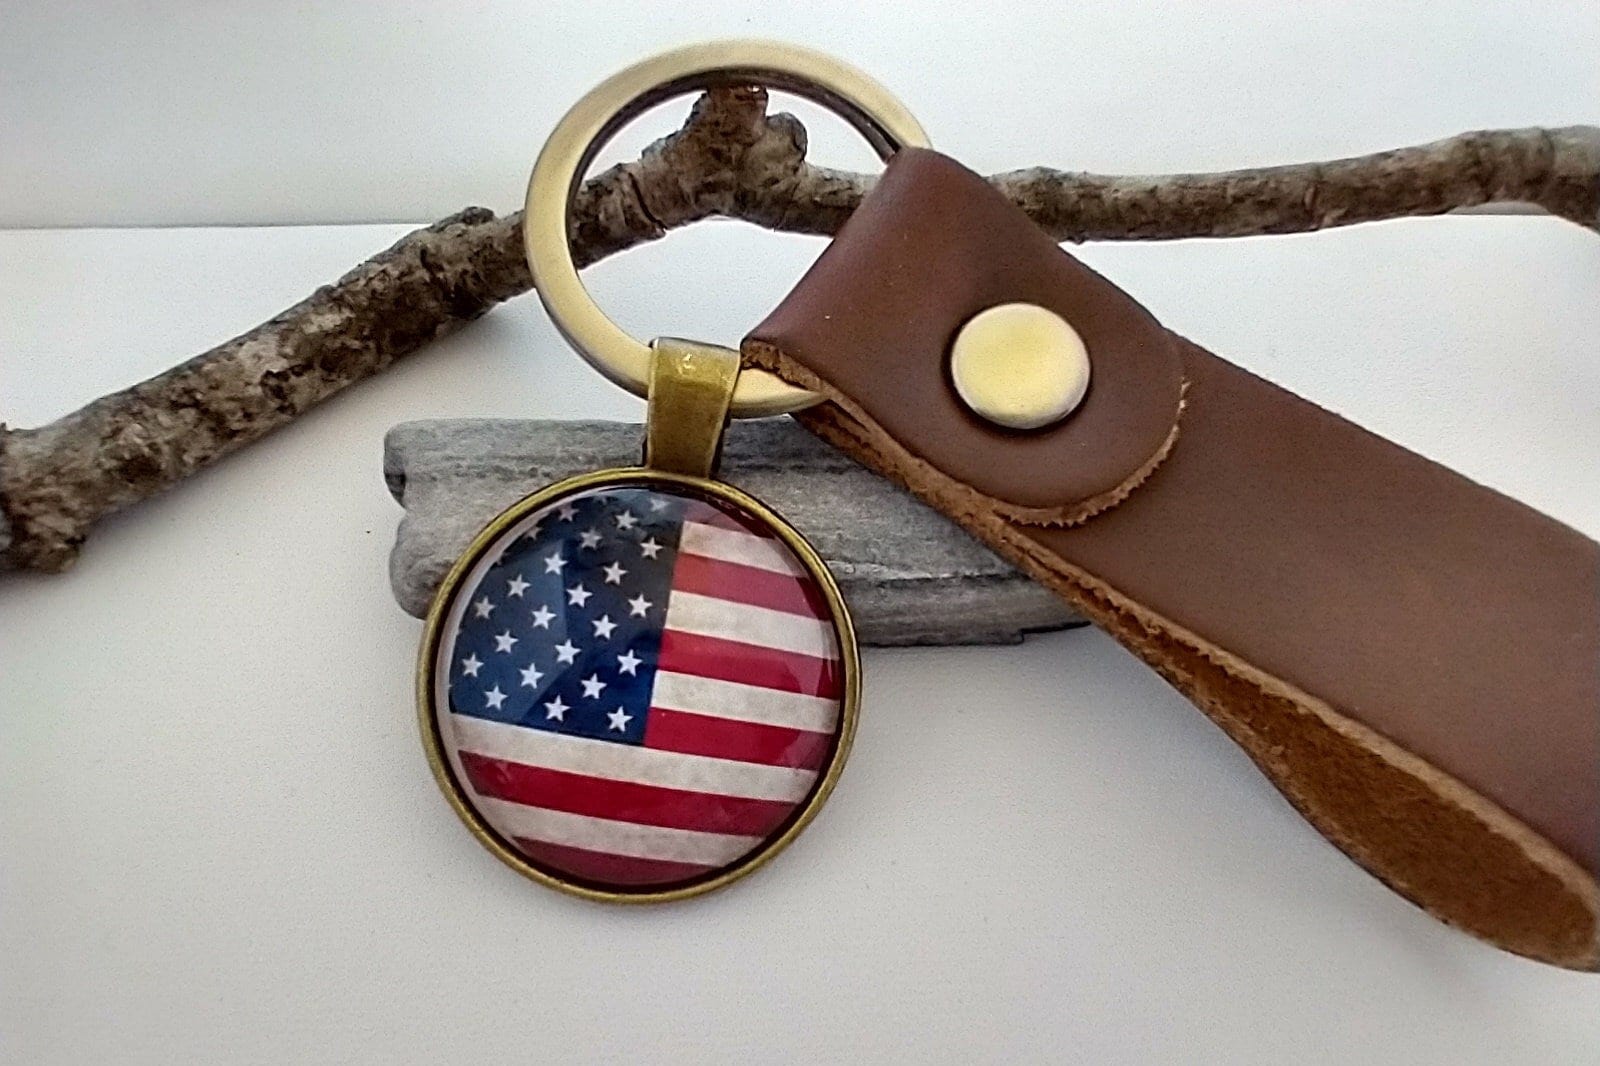 Leather Fob Keychain, List Prices Reflect MSRP, LKC-FLAG